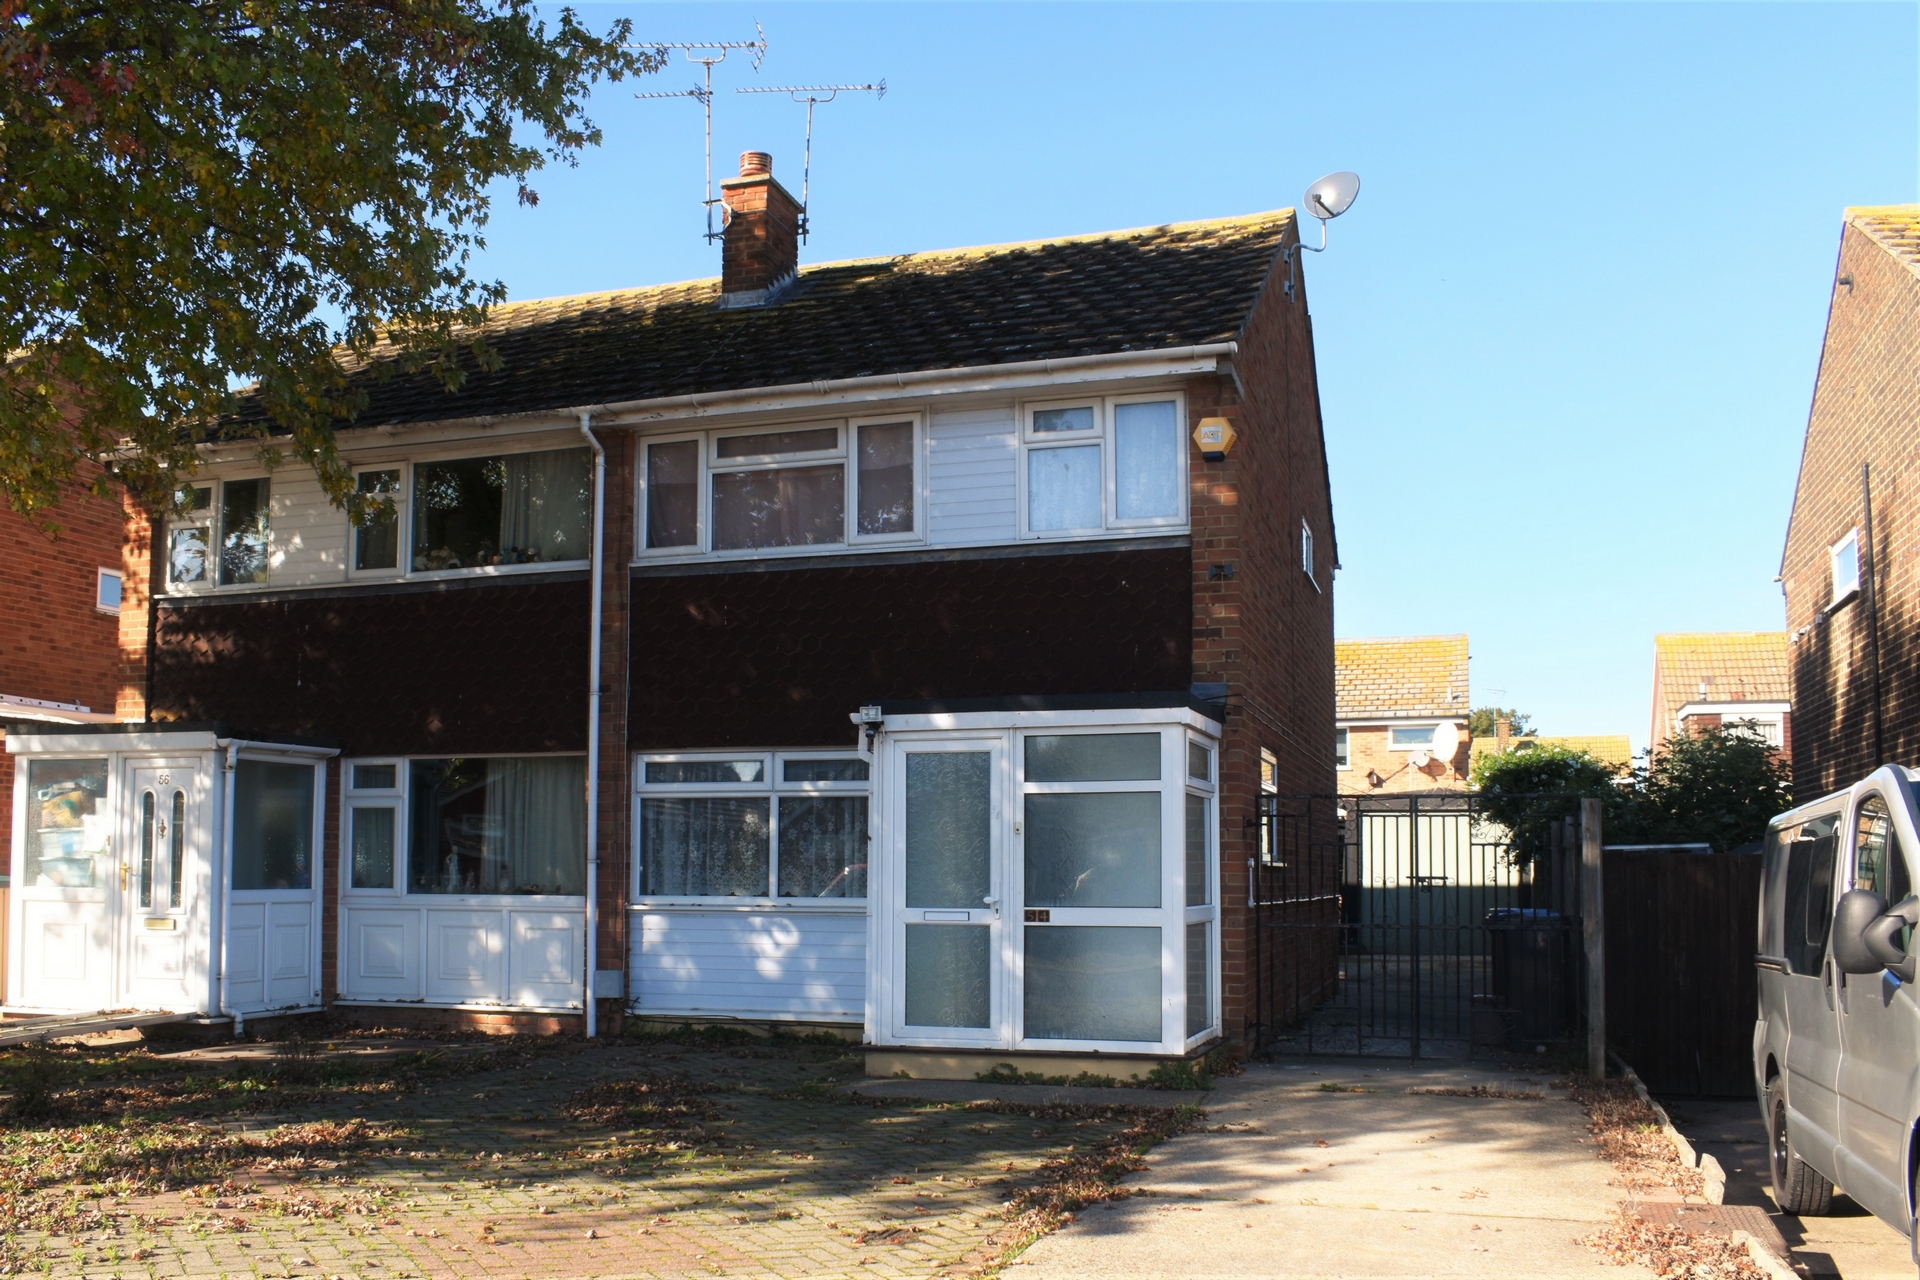 Spacious Three bedroomed house to rent with garden, garage and OSP, close to schools. Viewing highly recommended.